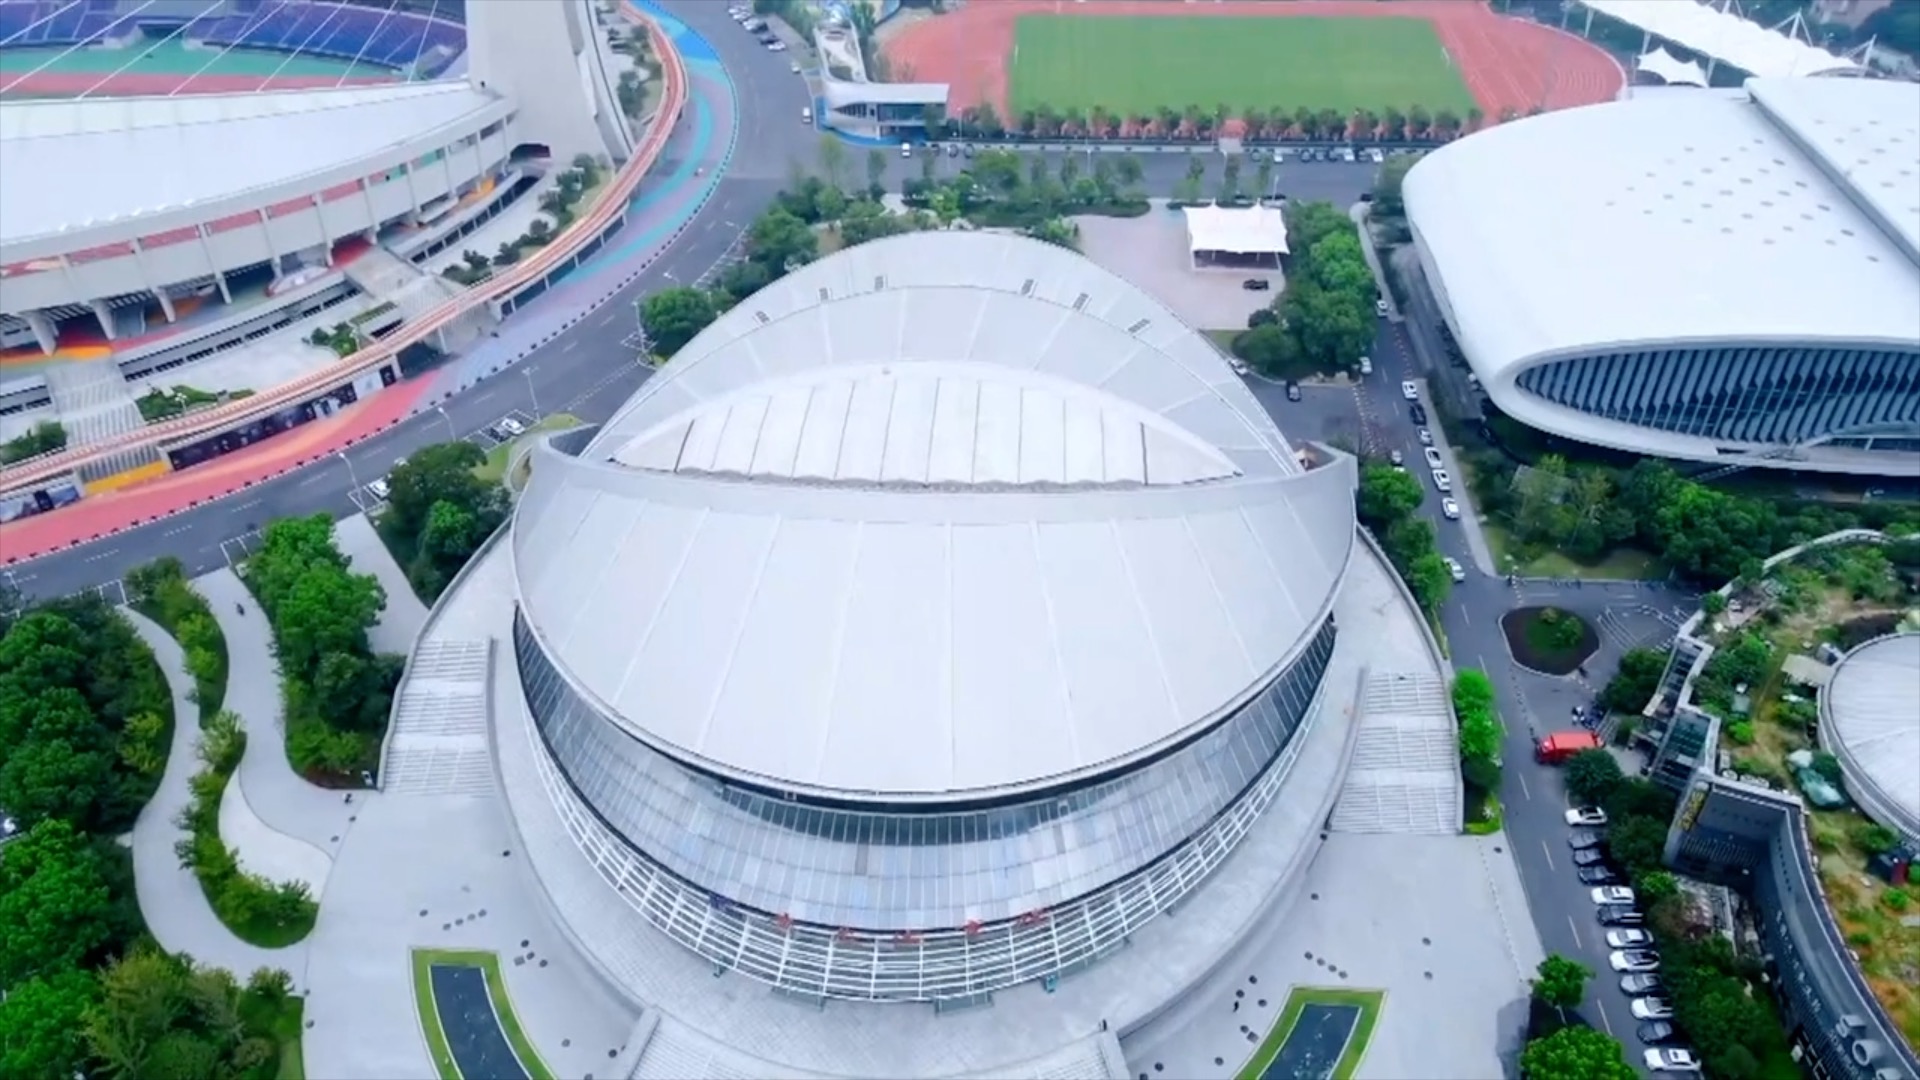 Venues Ready| Hangzhou's Huanglong Sports Center ready for Asian Games